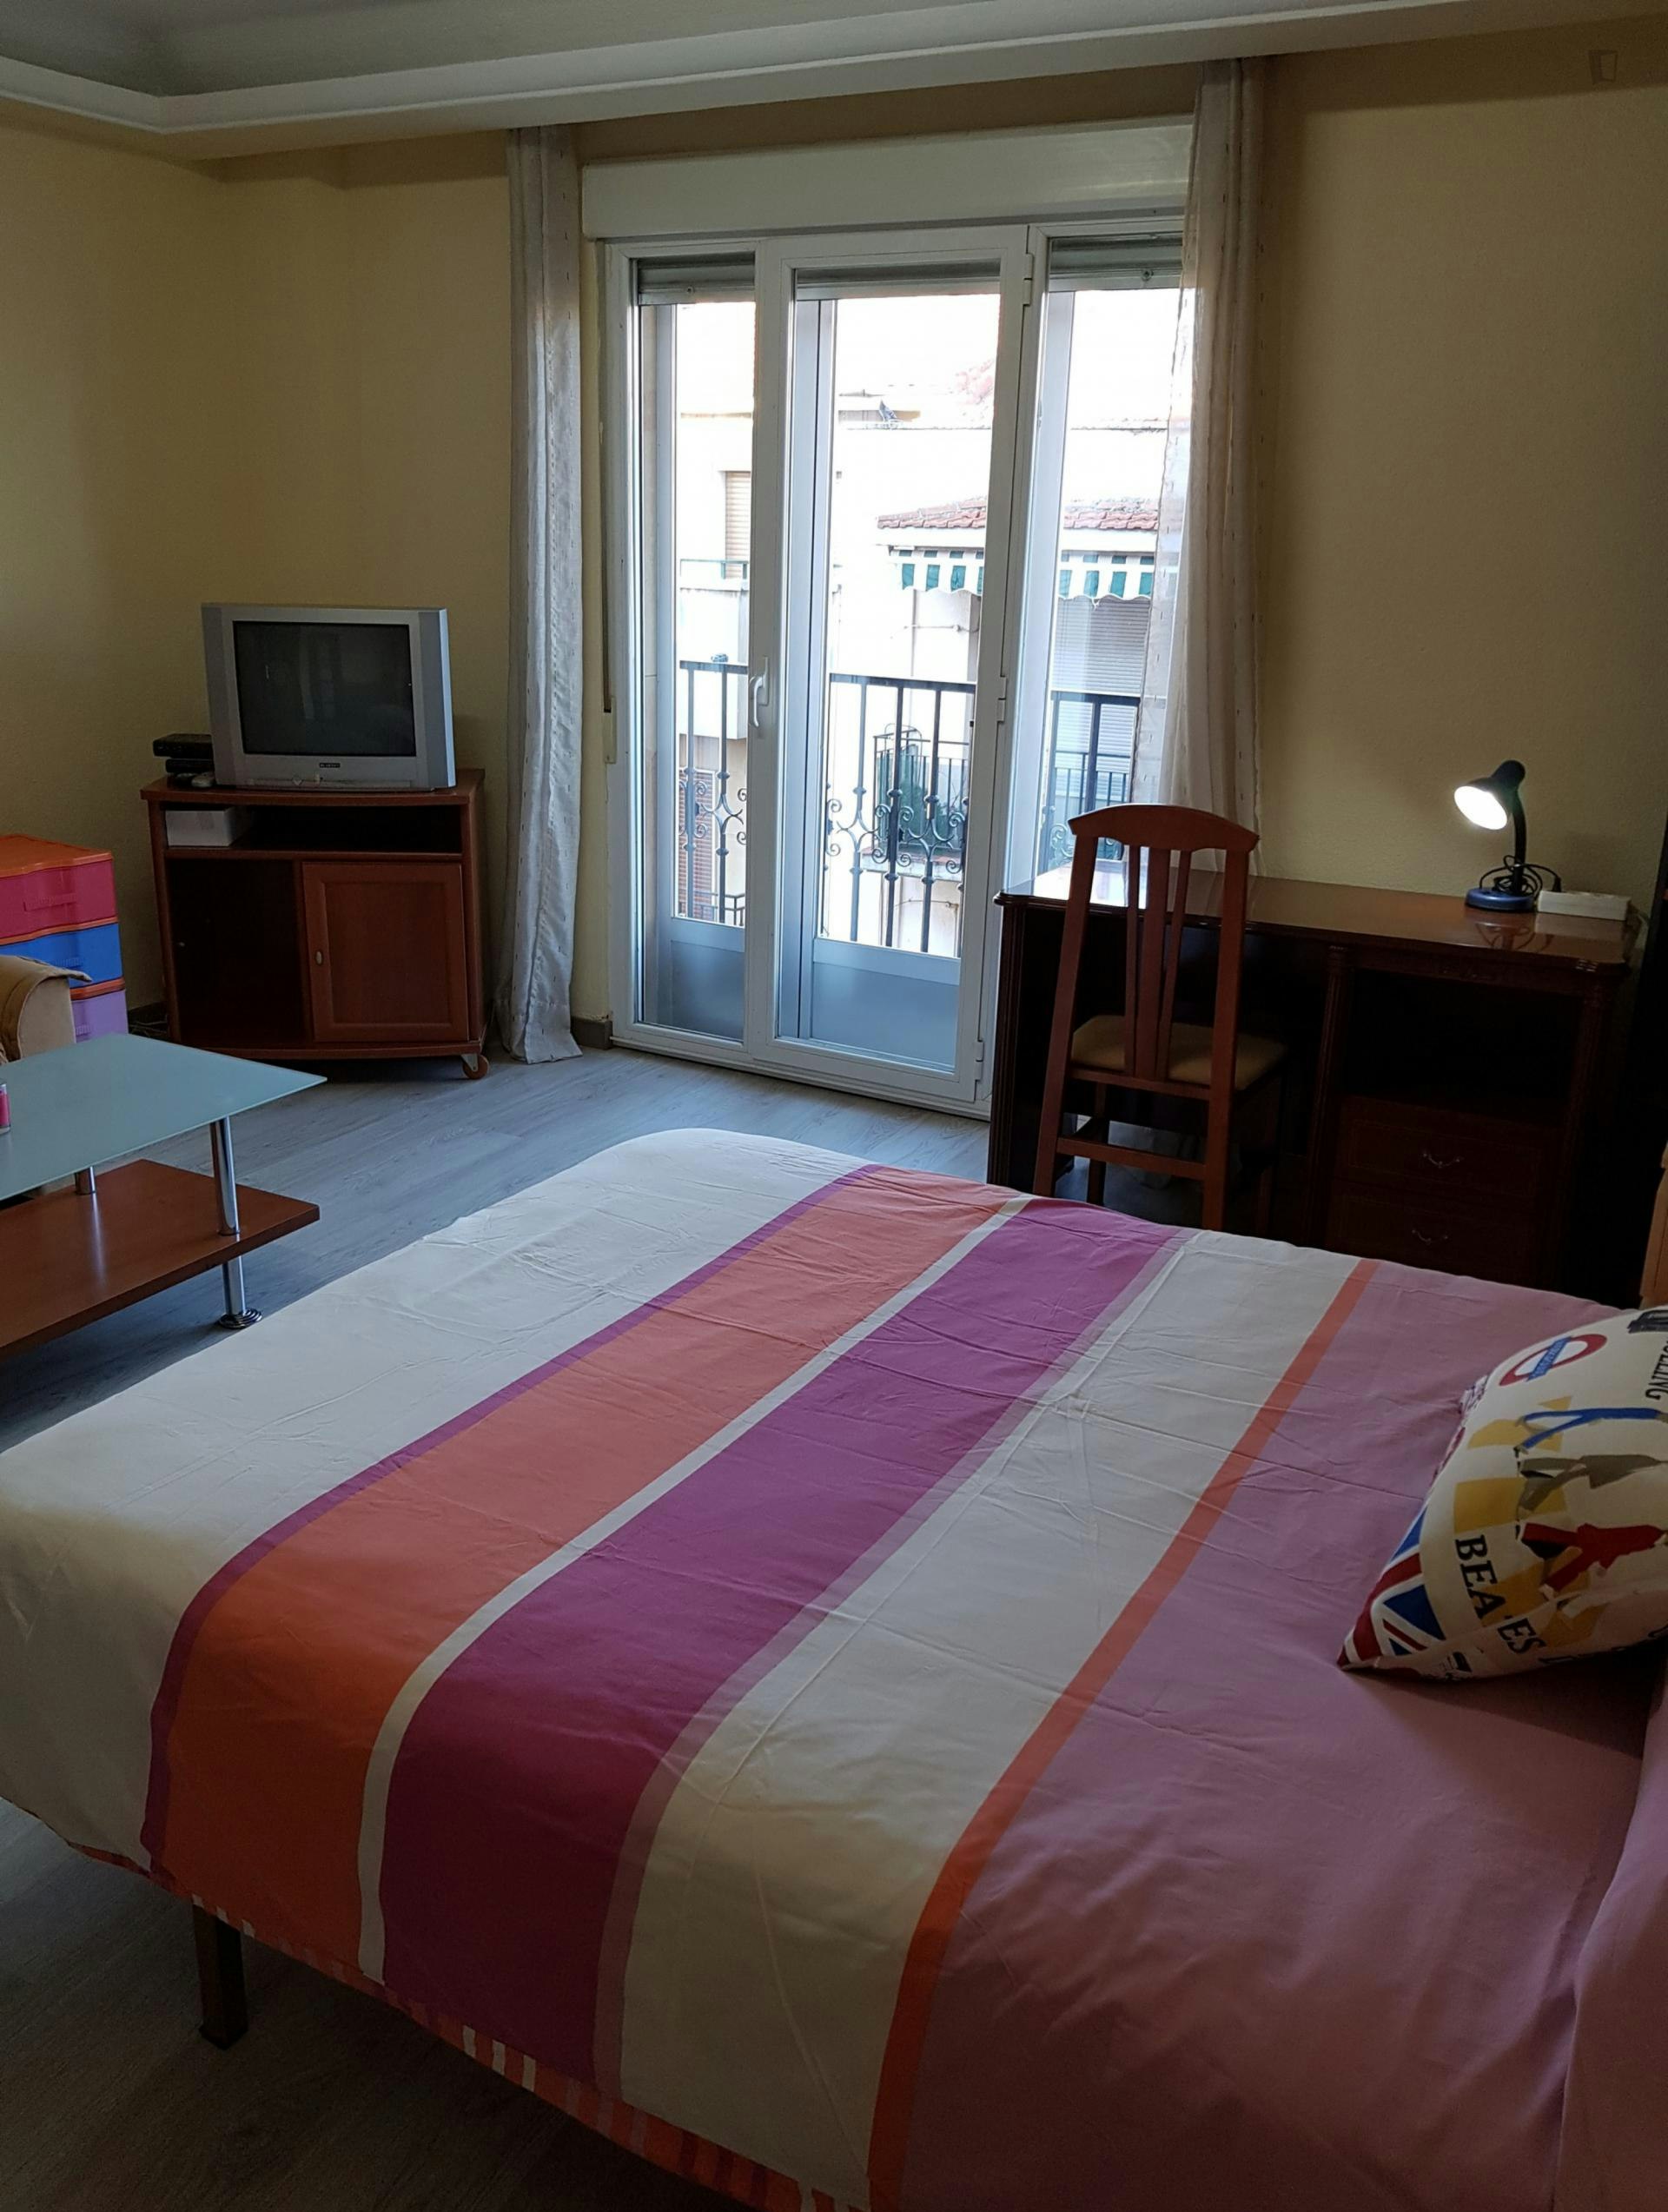 Stunning double bedroom with private balcony in Barrio del Oeste